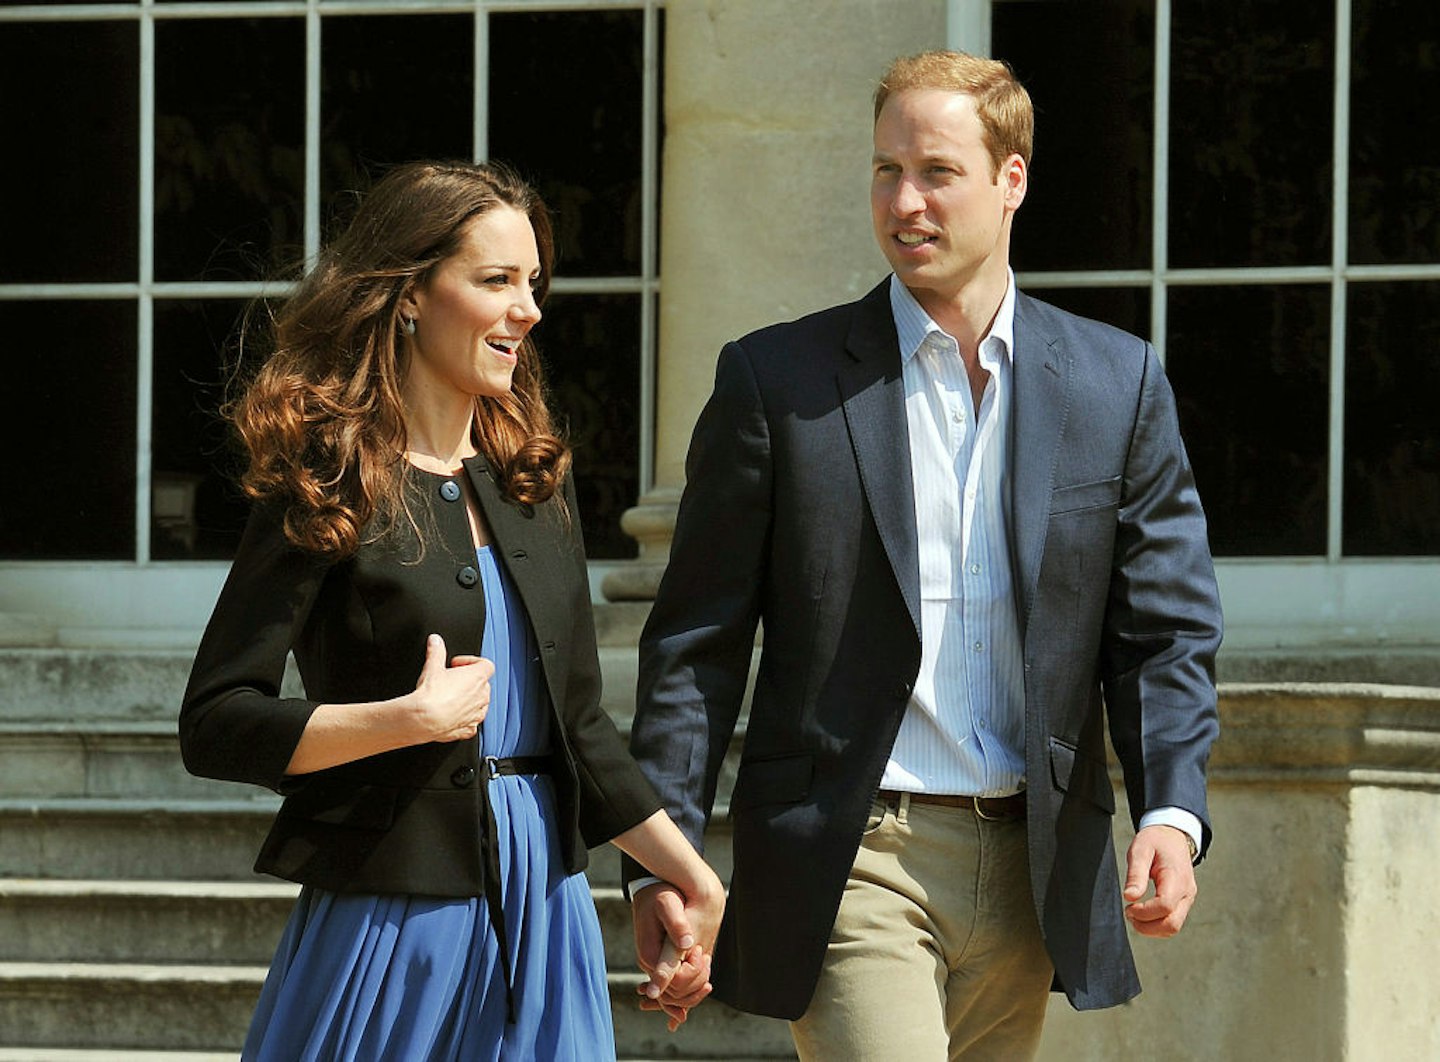 Prince William and Kate Middleton walking hand in hand